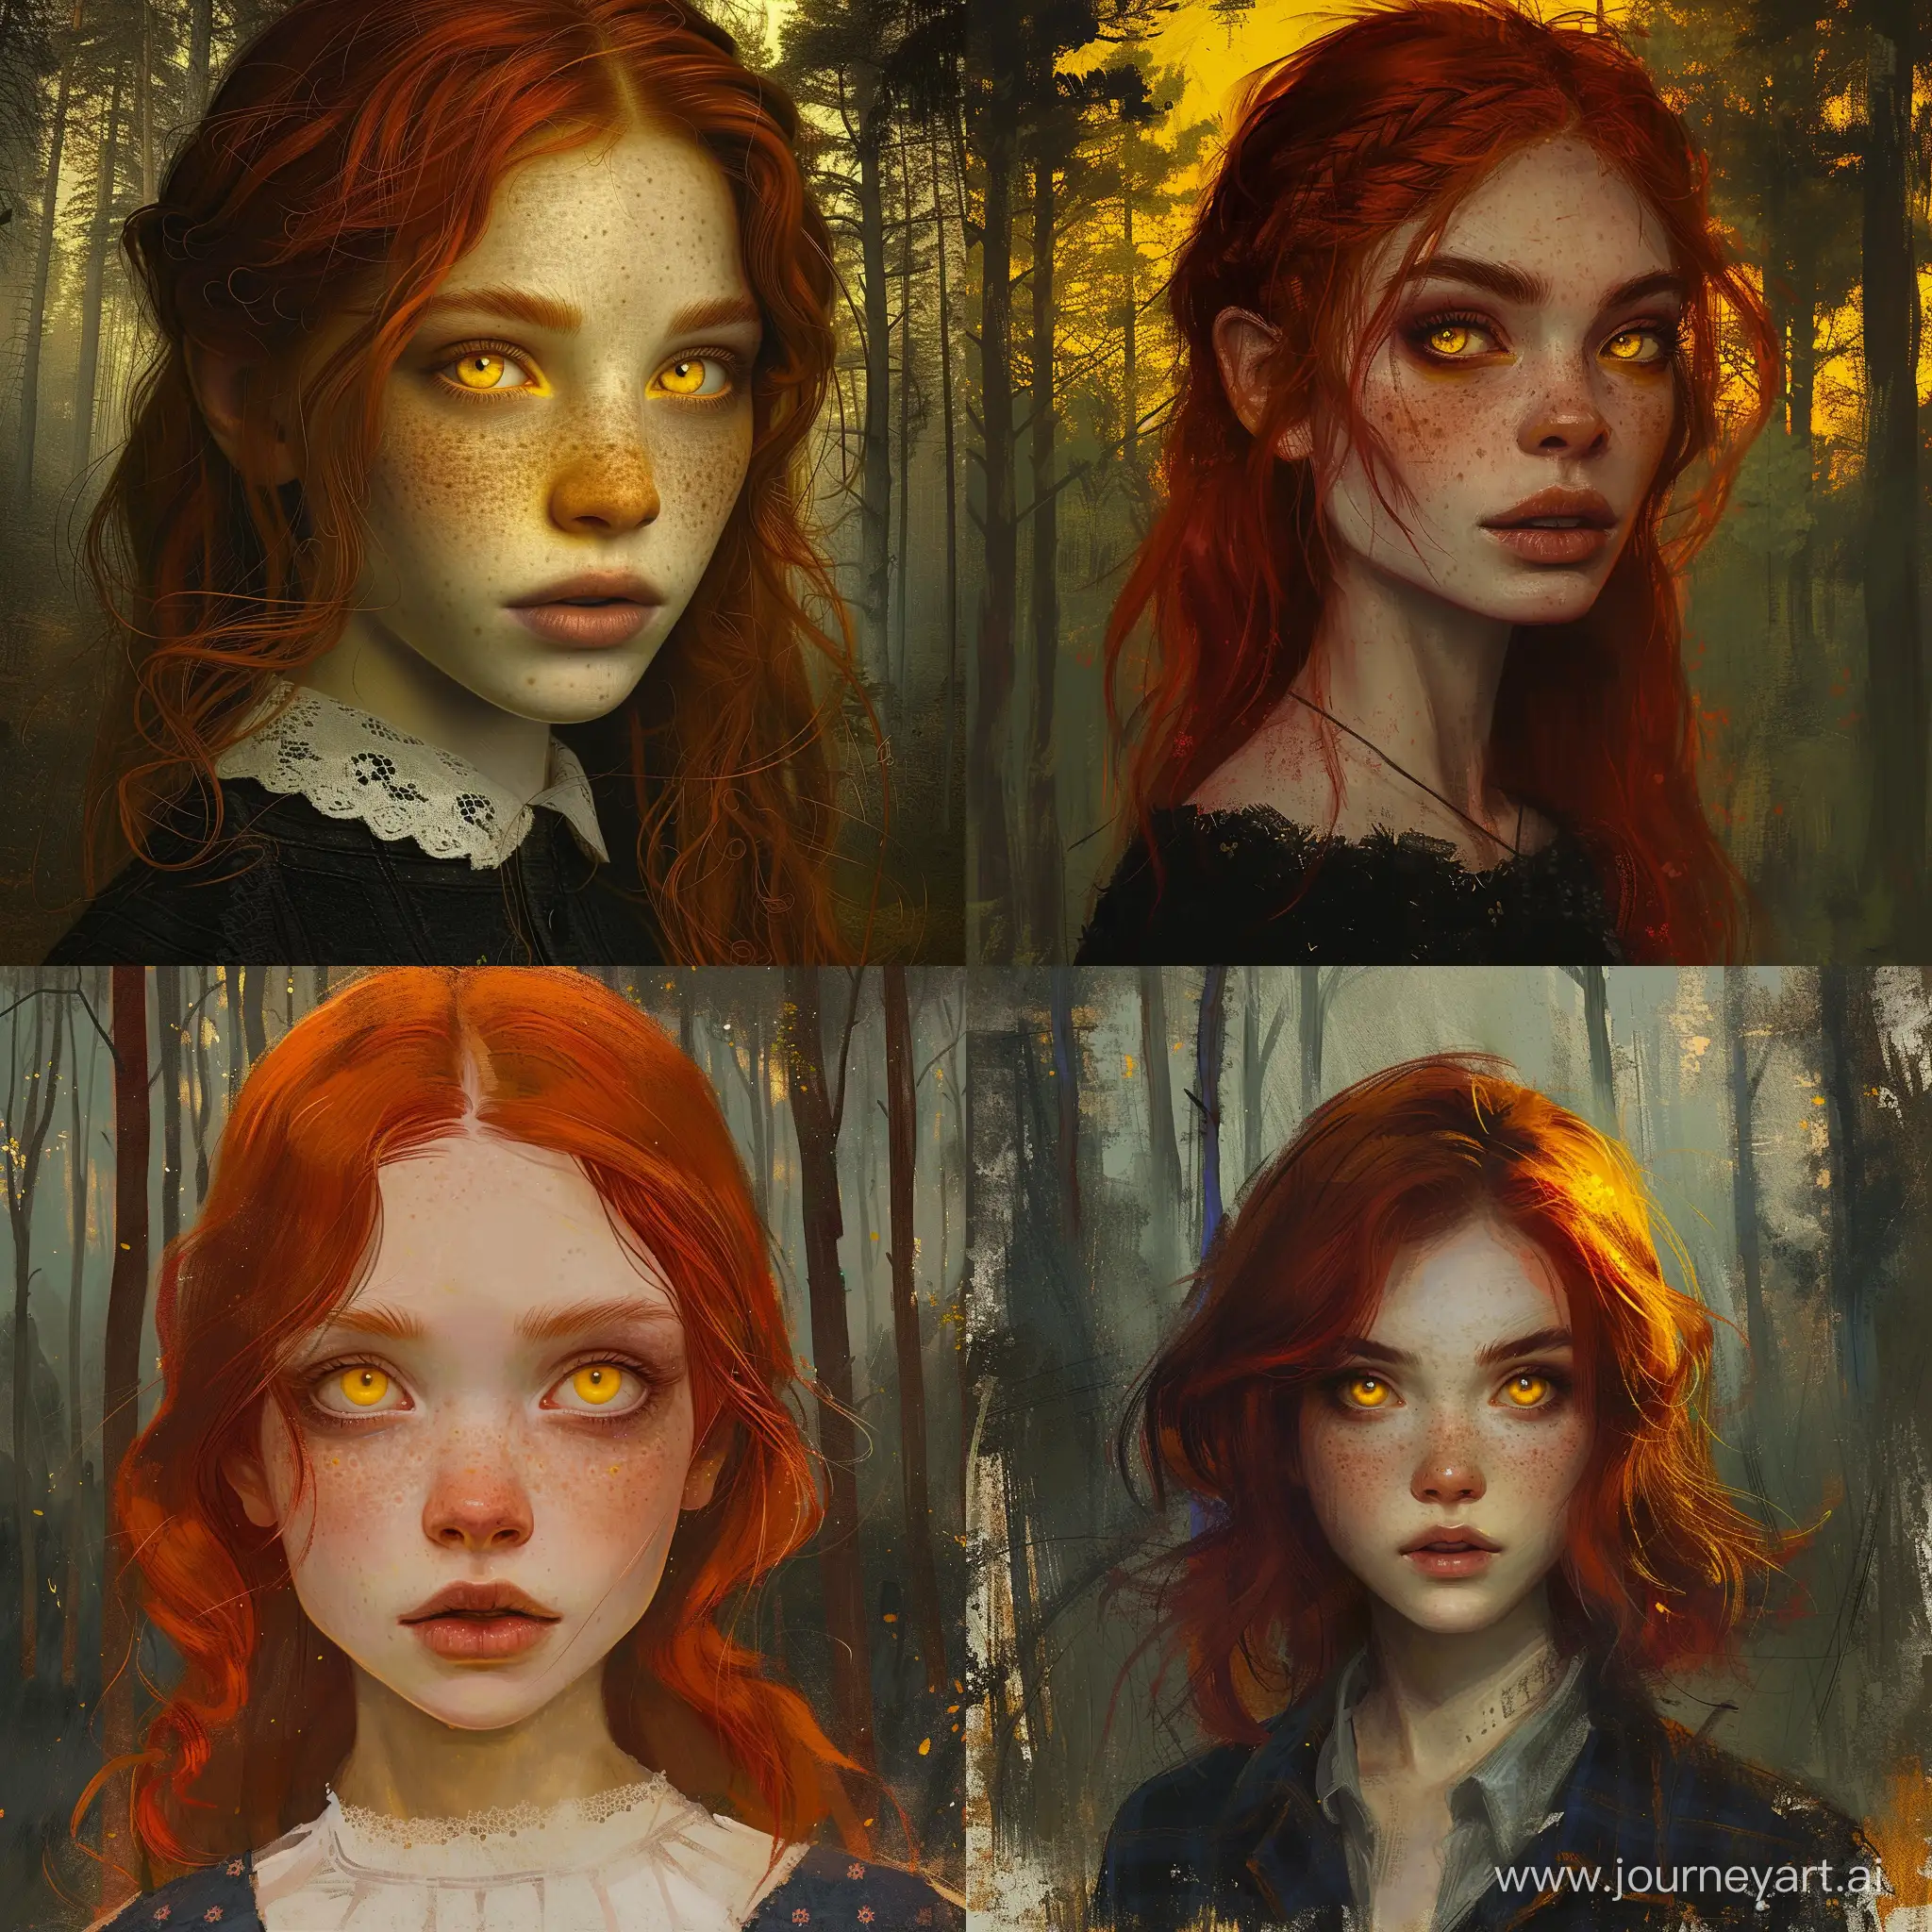 Red  hair young fattest girl with yellow eyes against a forest background, oil painting, classicism, digital art